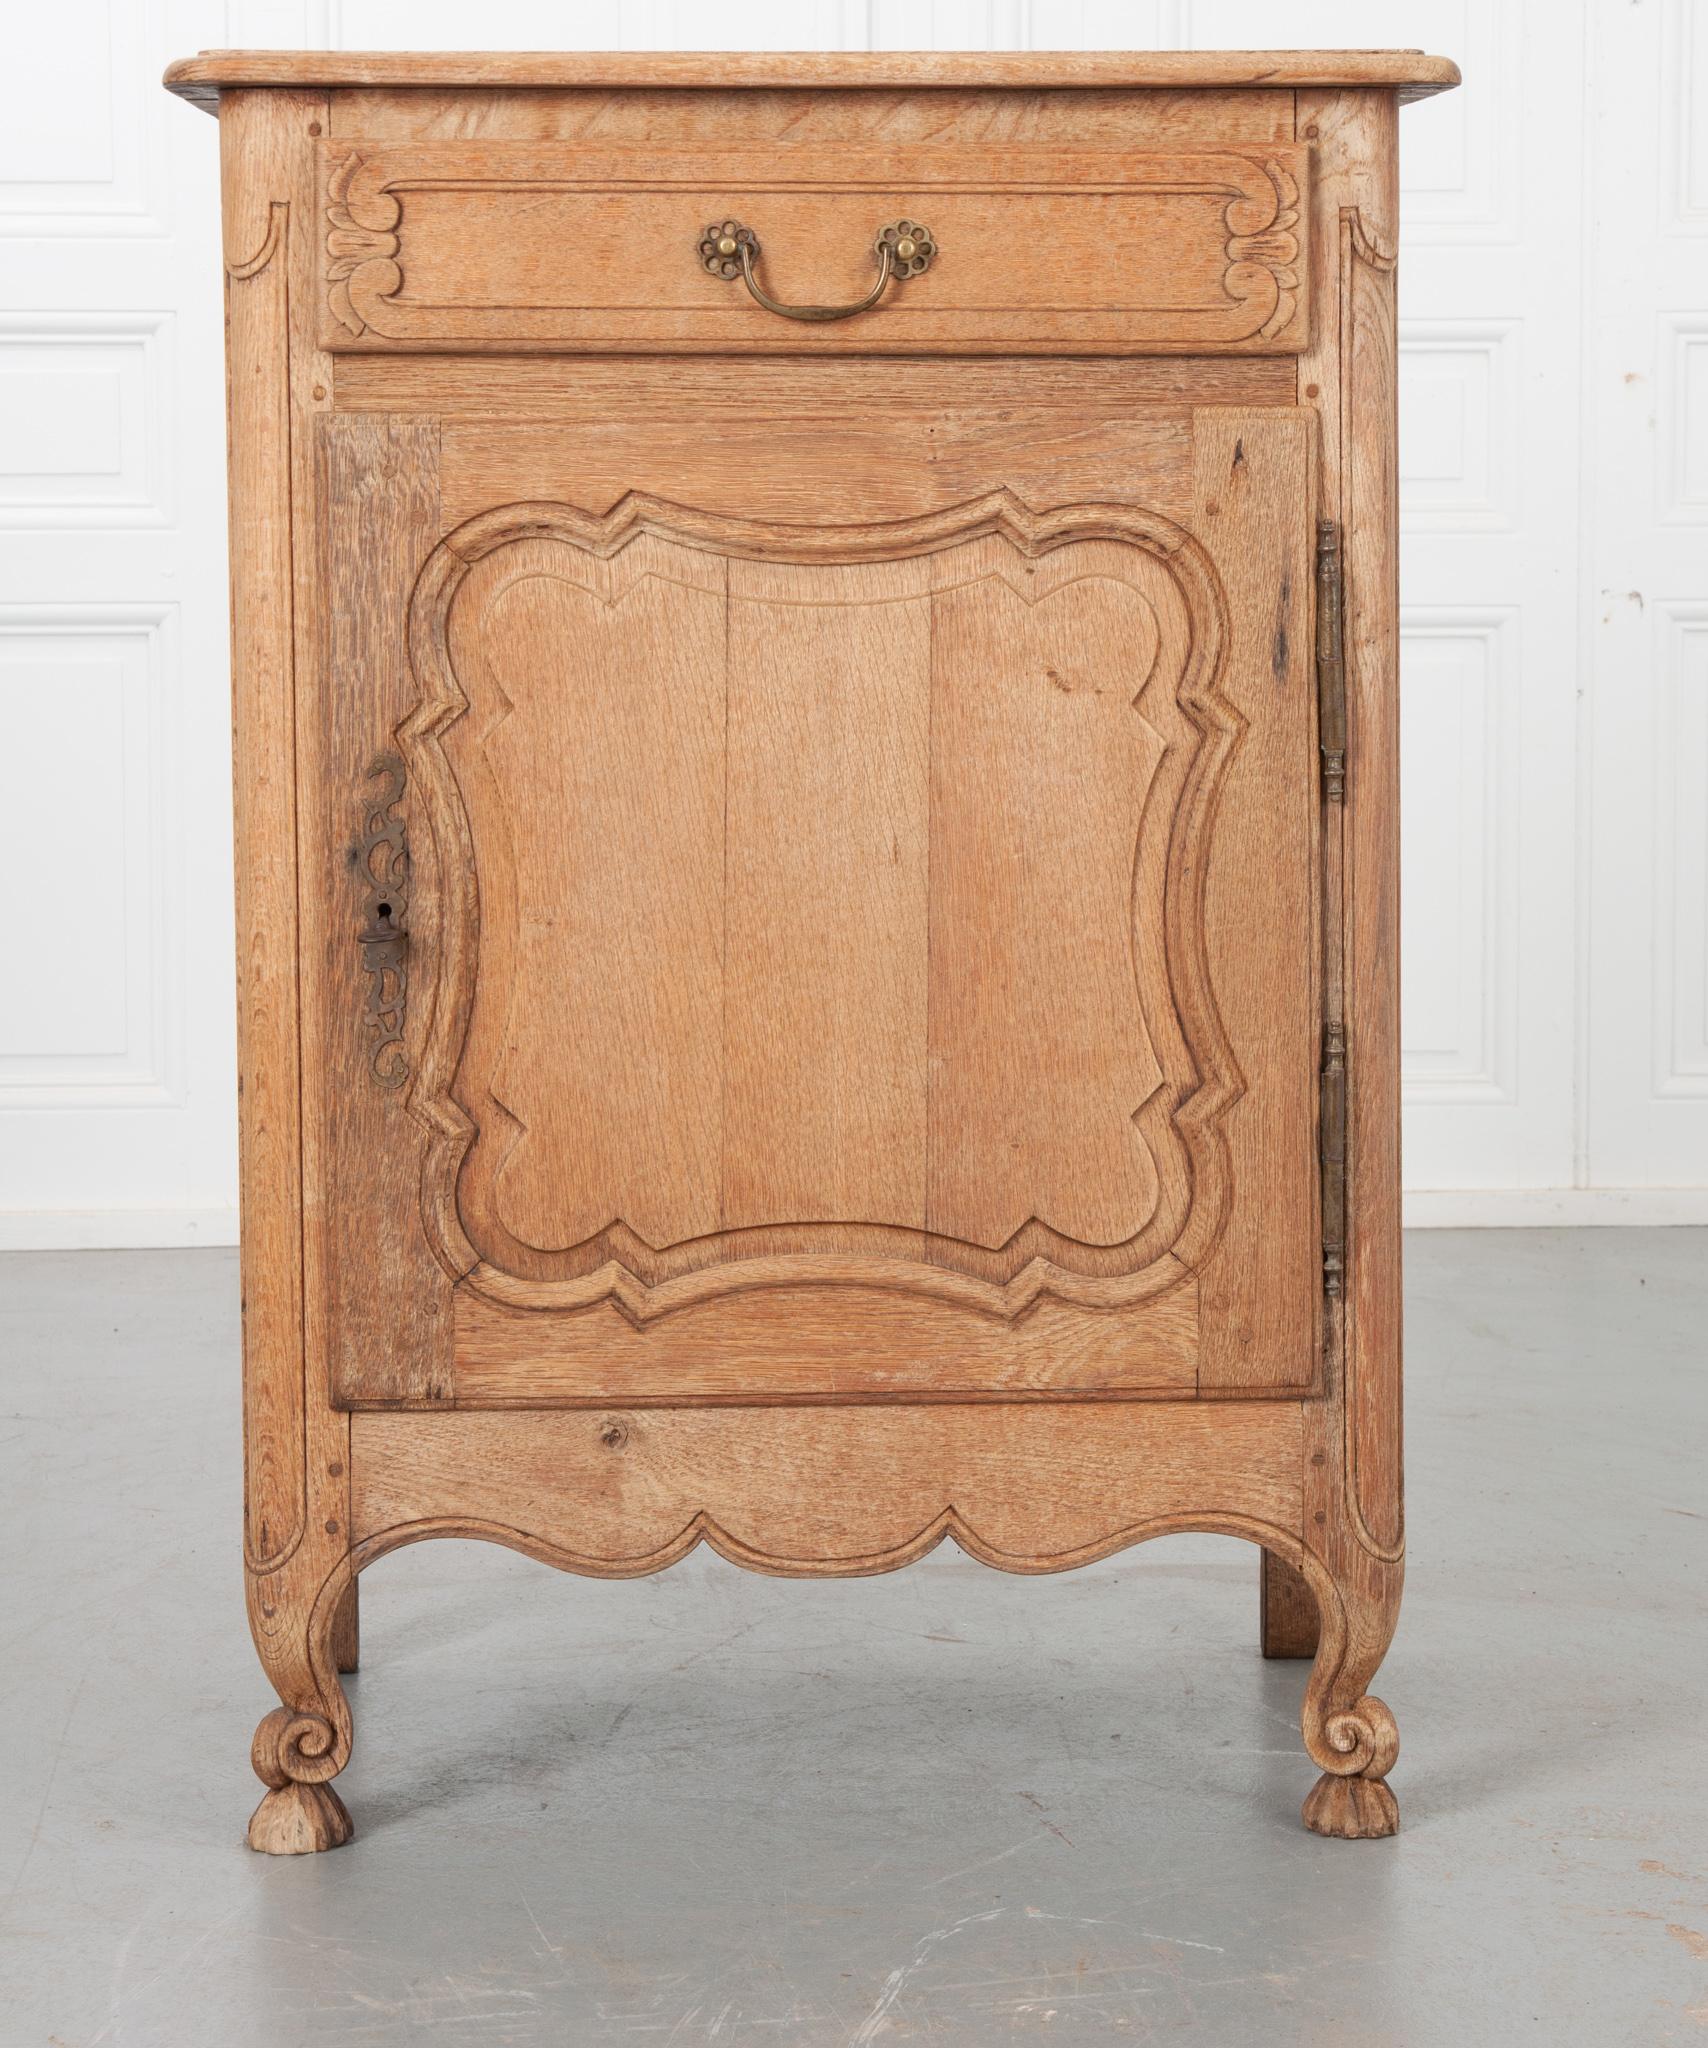 This is a fine example of a French Louis XV style confiture, a single door cabinet used to store jams or other preserved foods. The whole is made of beautifully aged oak that’s been bleached to enrich the overall appearance. Three cut boards with